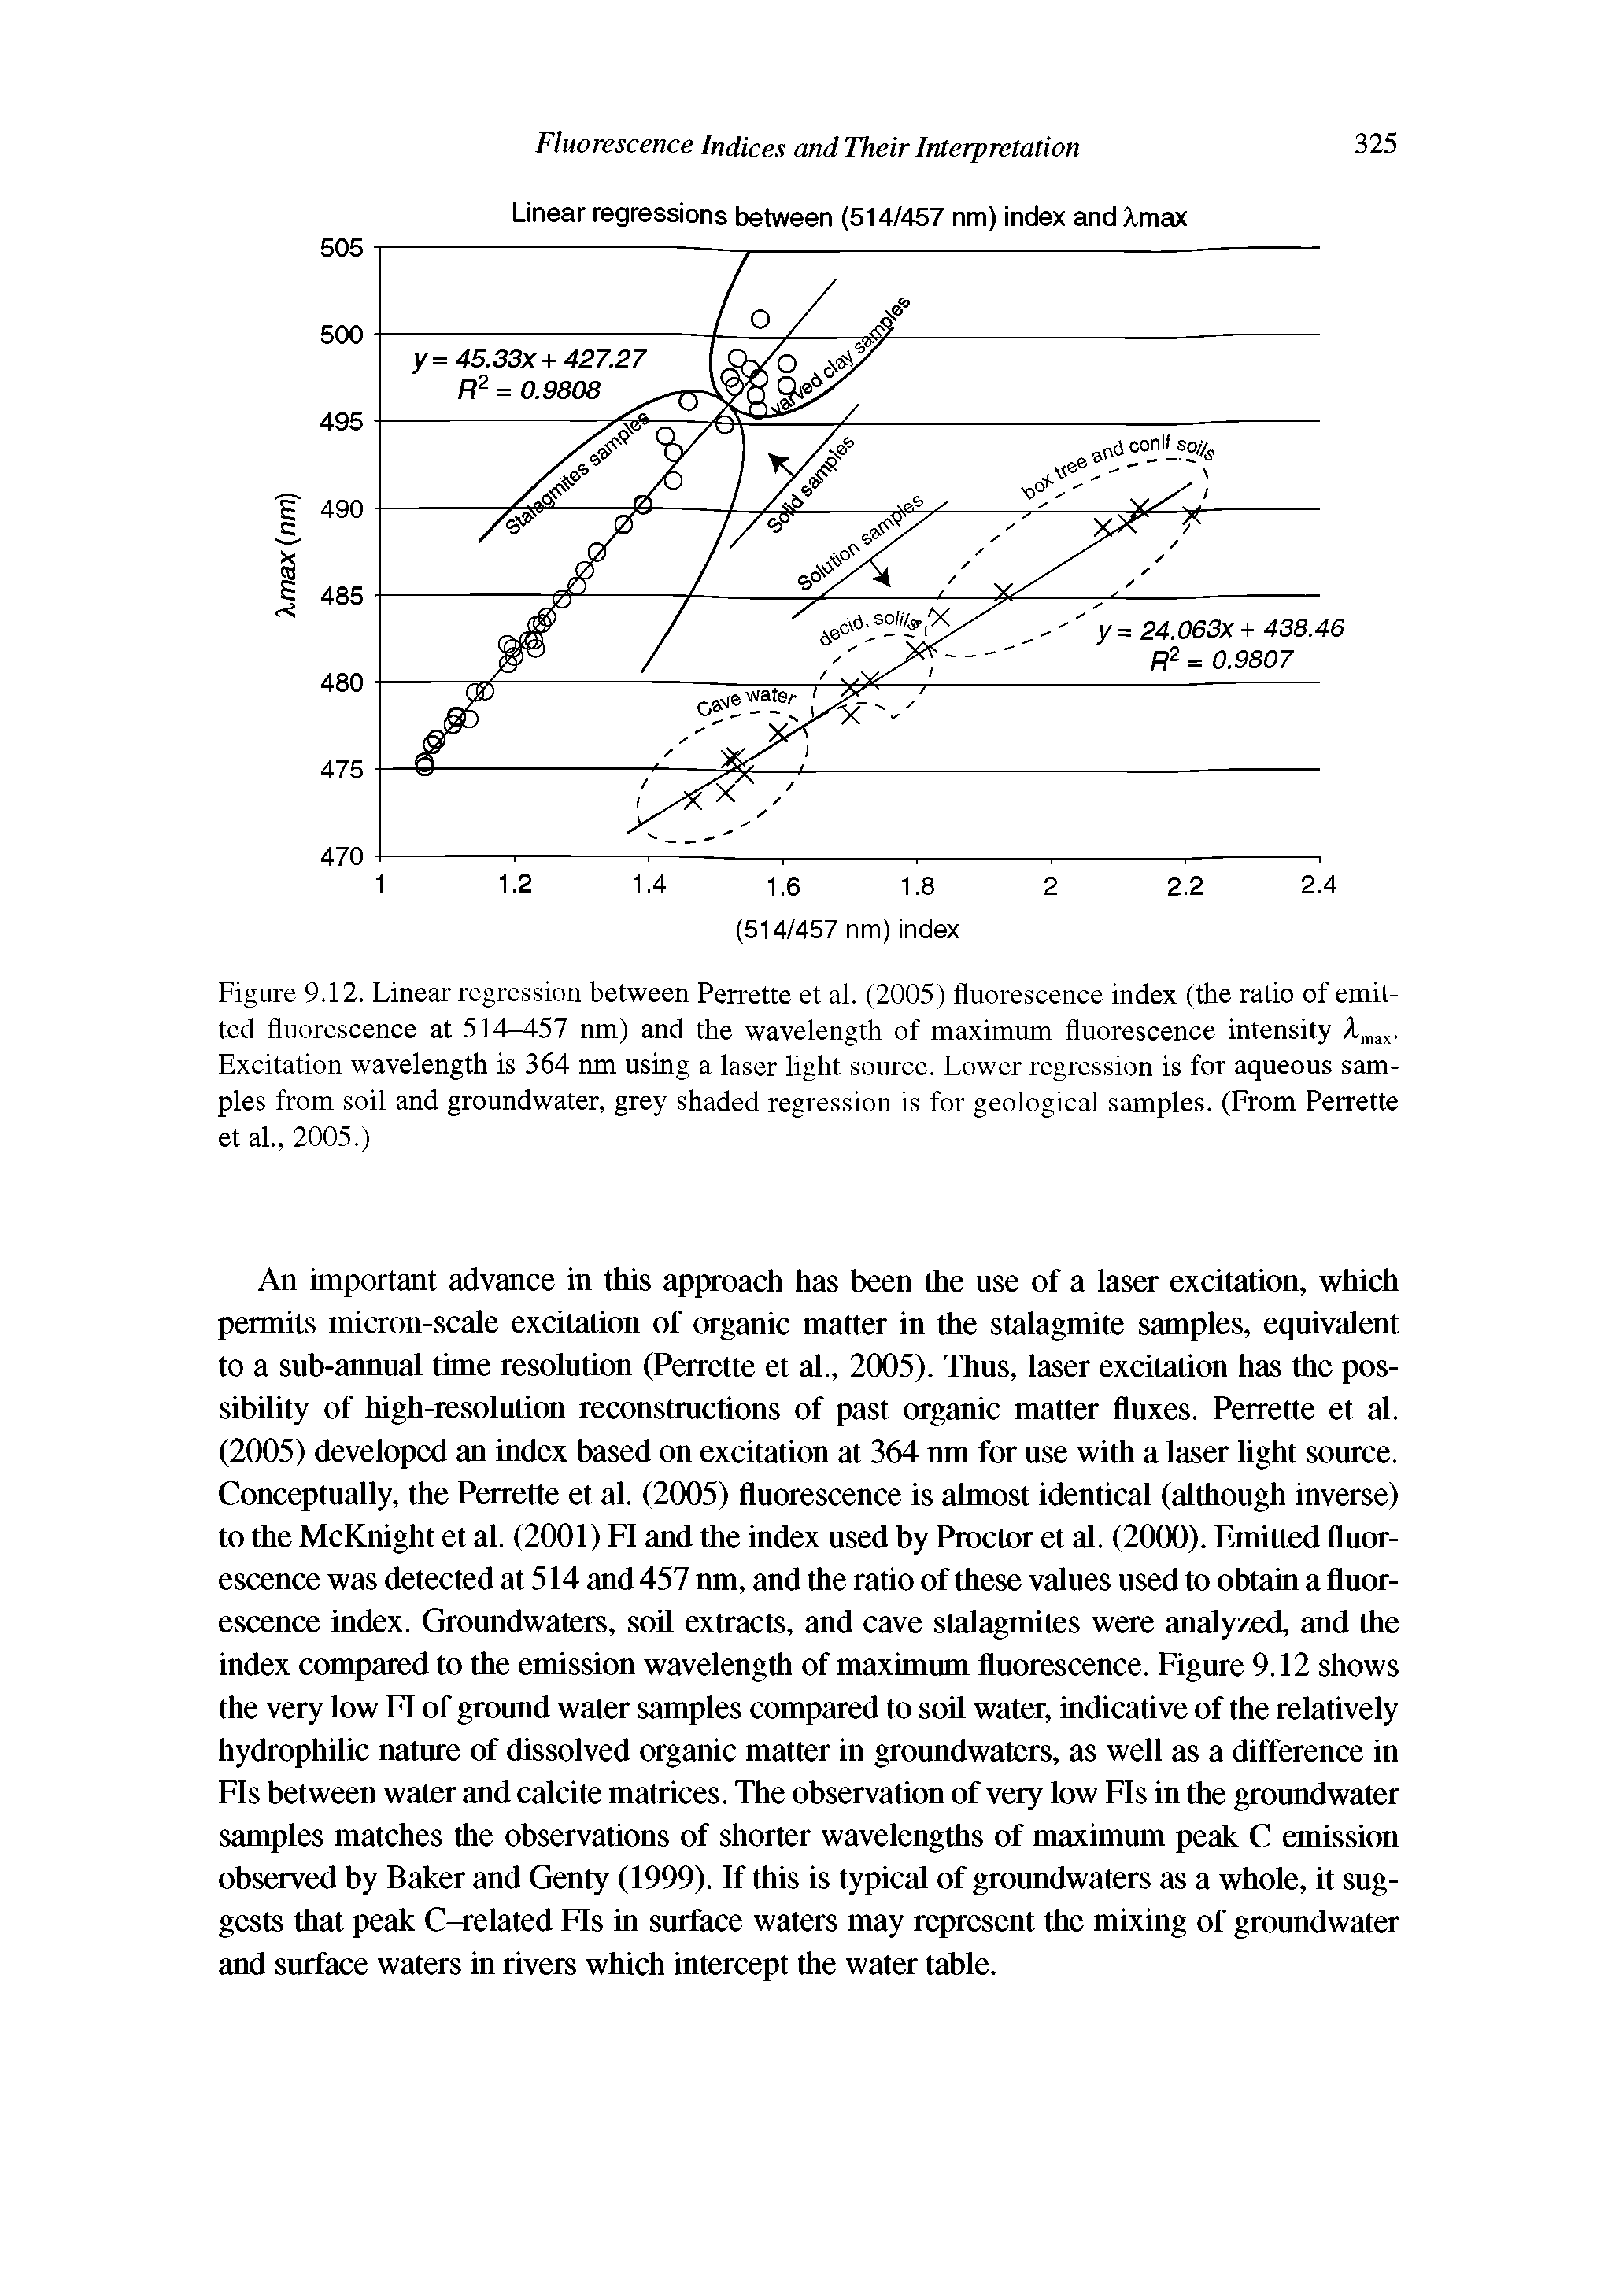 Figure 9.12. Linear regression between Perrette et al. (2005) fluorescence index (the ratio of emitted fluorescence at 514-457 nm) and the wavelength of maximum fluorescence intensity Excitation wavelength is 364 nm using a laser hght source. Lower regression is for aqueous samples from soil and groundwater, grey shaded regression is for geological samples. (From Perrette et al., 2005.)...